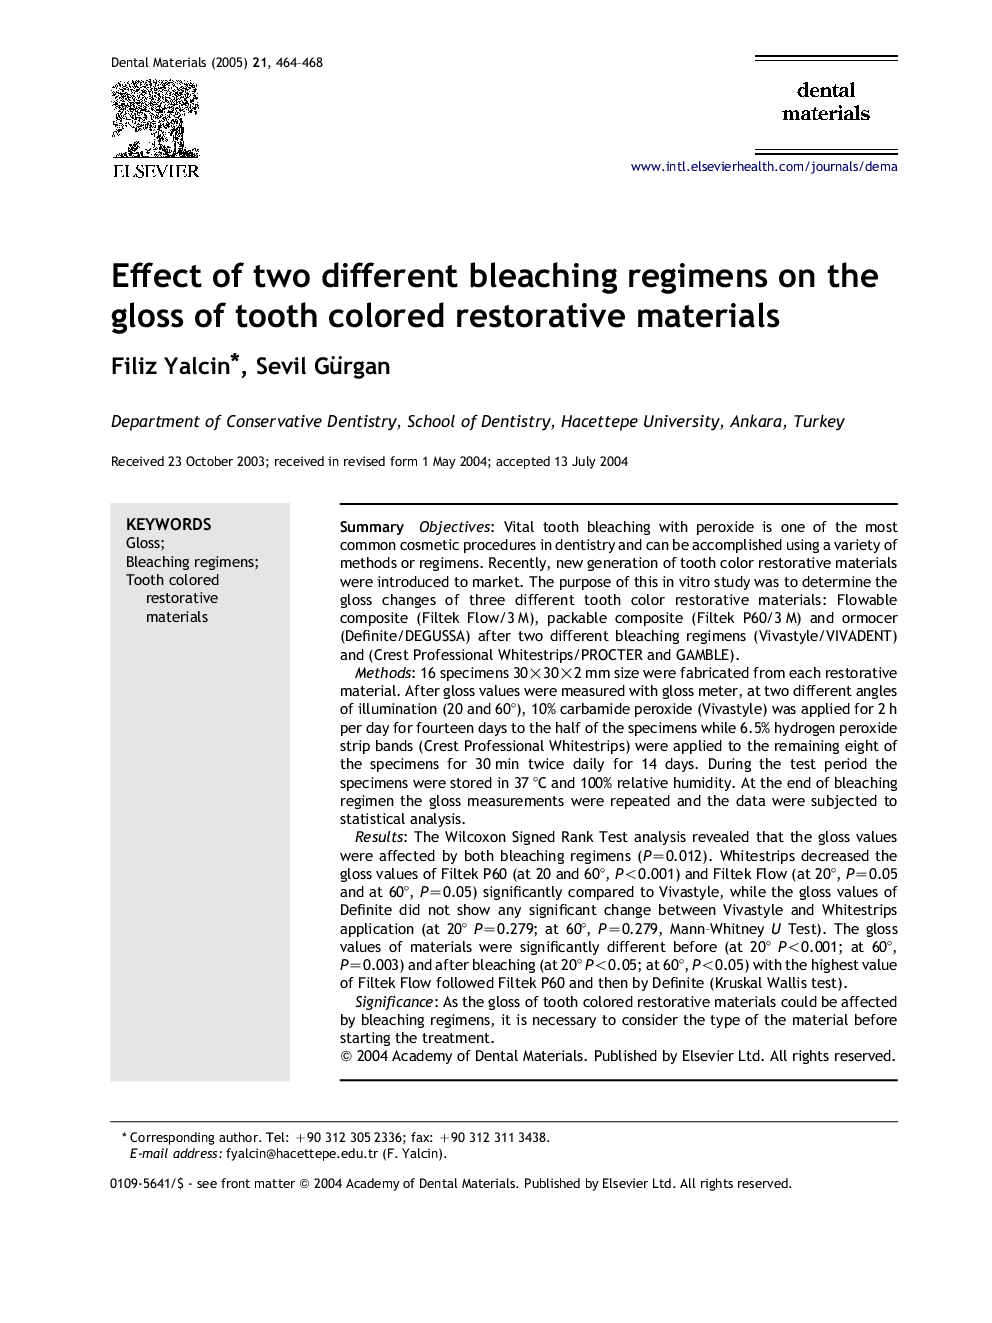 Effect of two different bleaching regimens on the gloss of tooth colored restorative materials